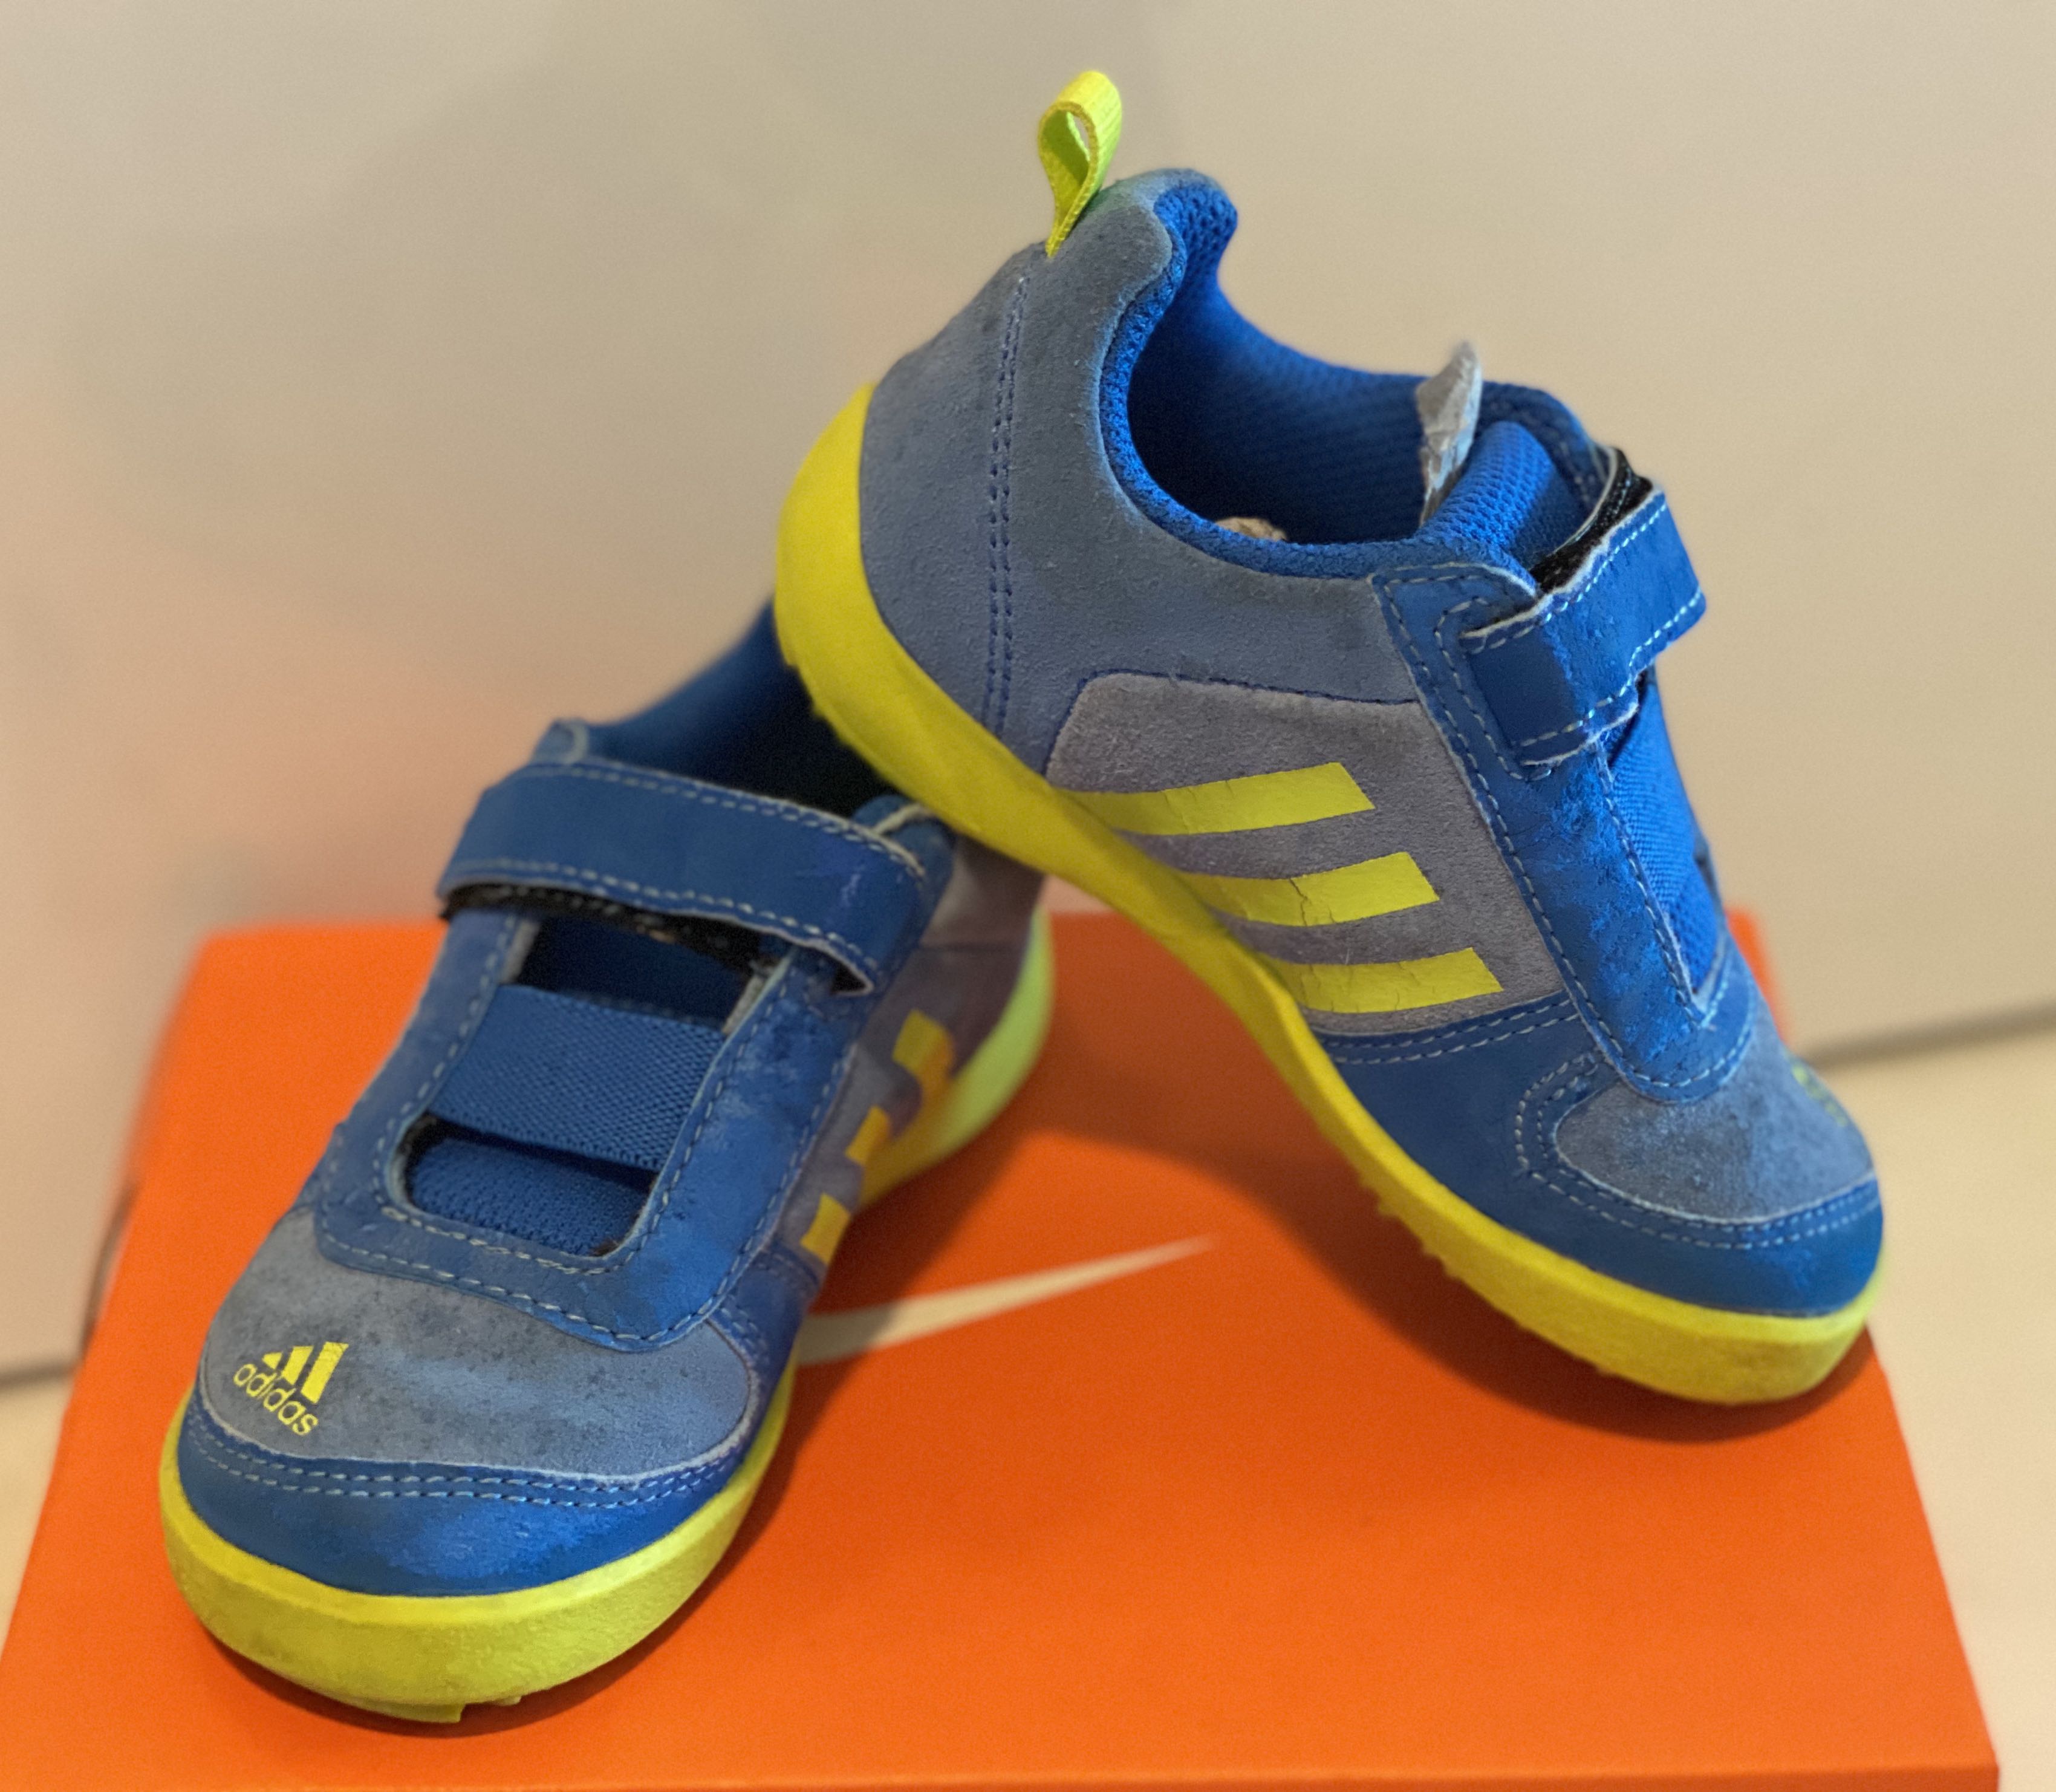 sports shoes for 10 year boy